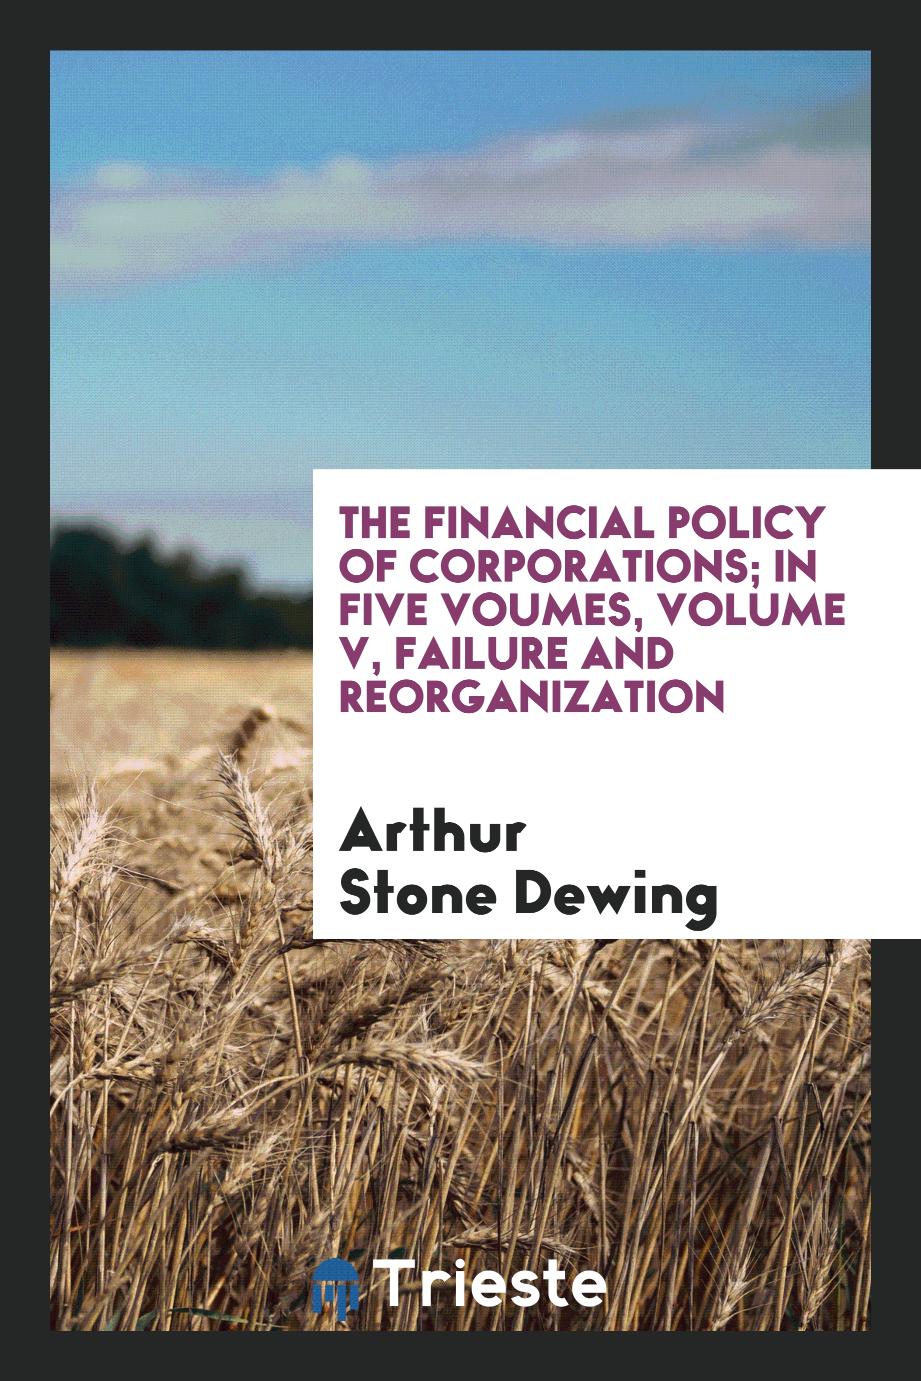 Arthur Stone Dewing - The financial policy of corporations; in five voumes, Volume V, Failure and reorganization